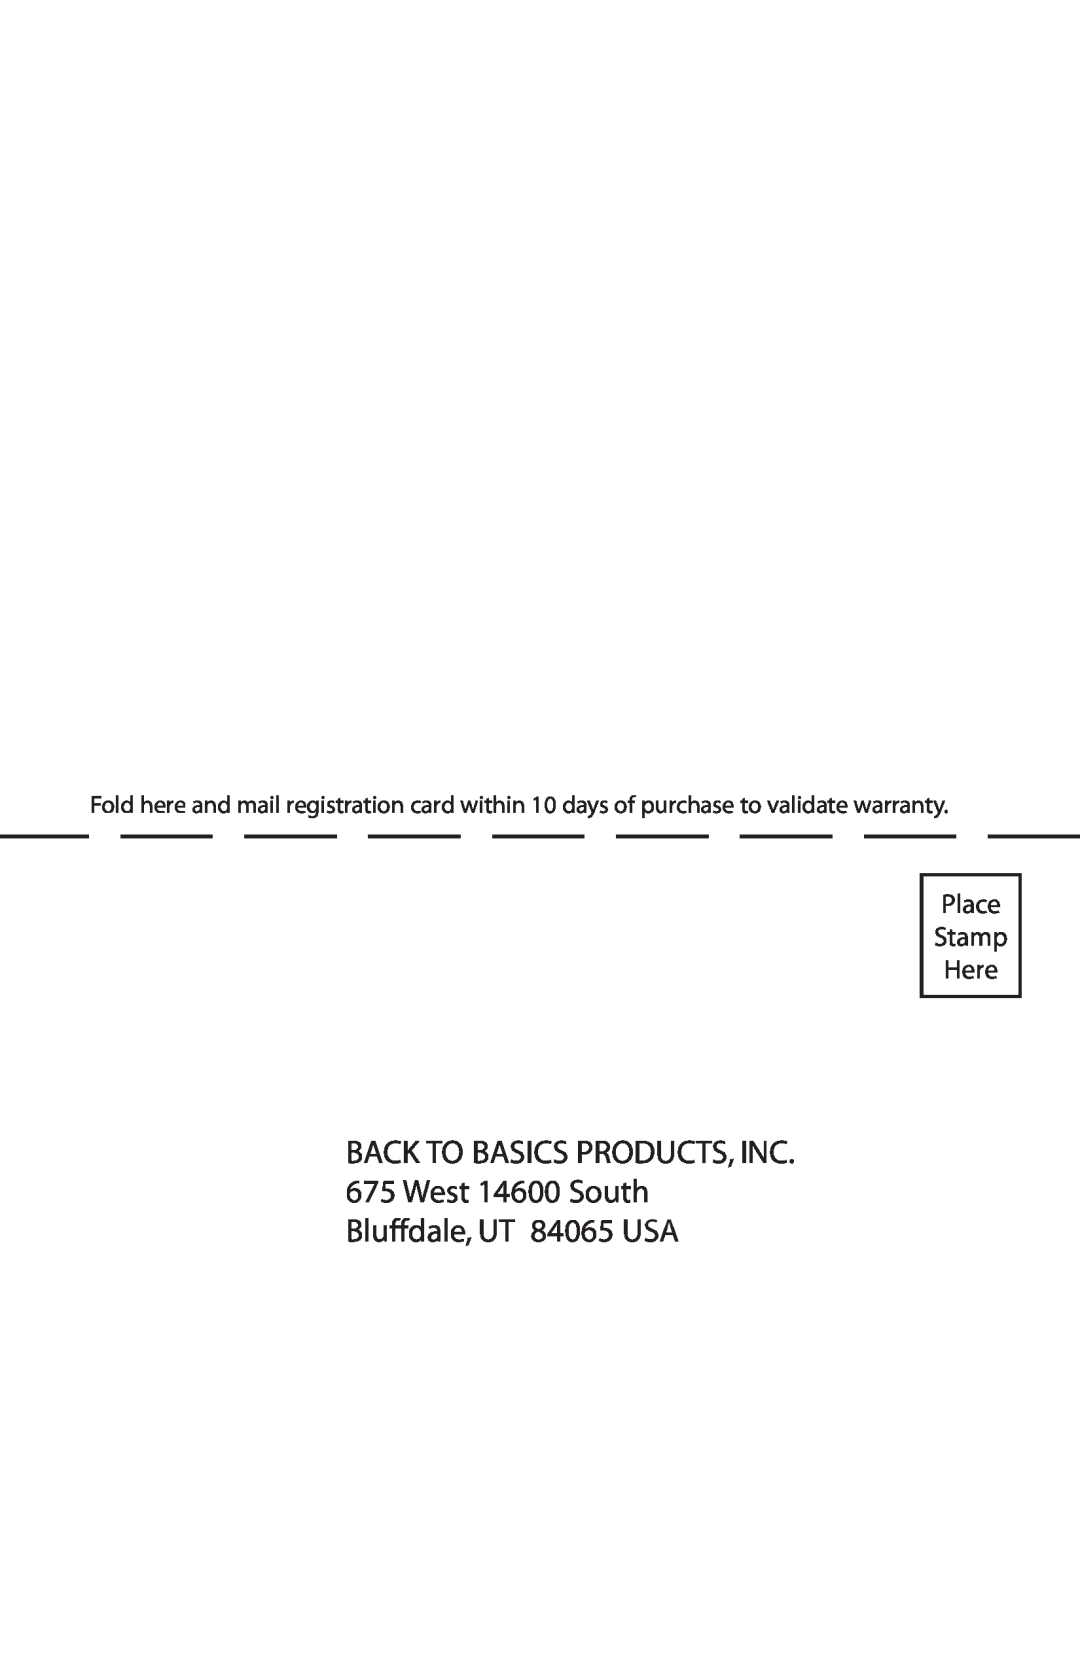 West Bend Back to Basics CC500 manual BACK TO BASICS PRODUCTS, INC 675 West 14600 South, Bluffdale, UT 84065 USA 